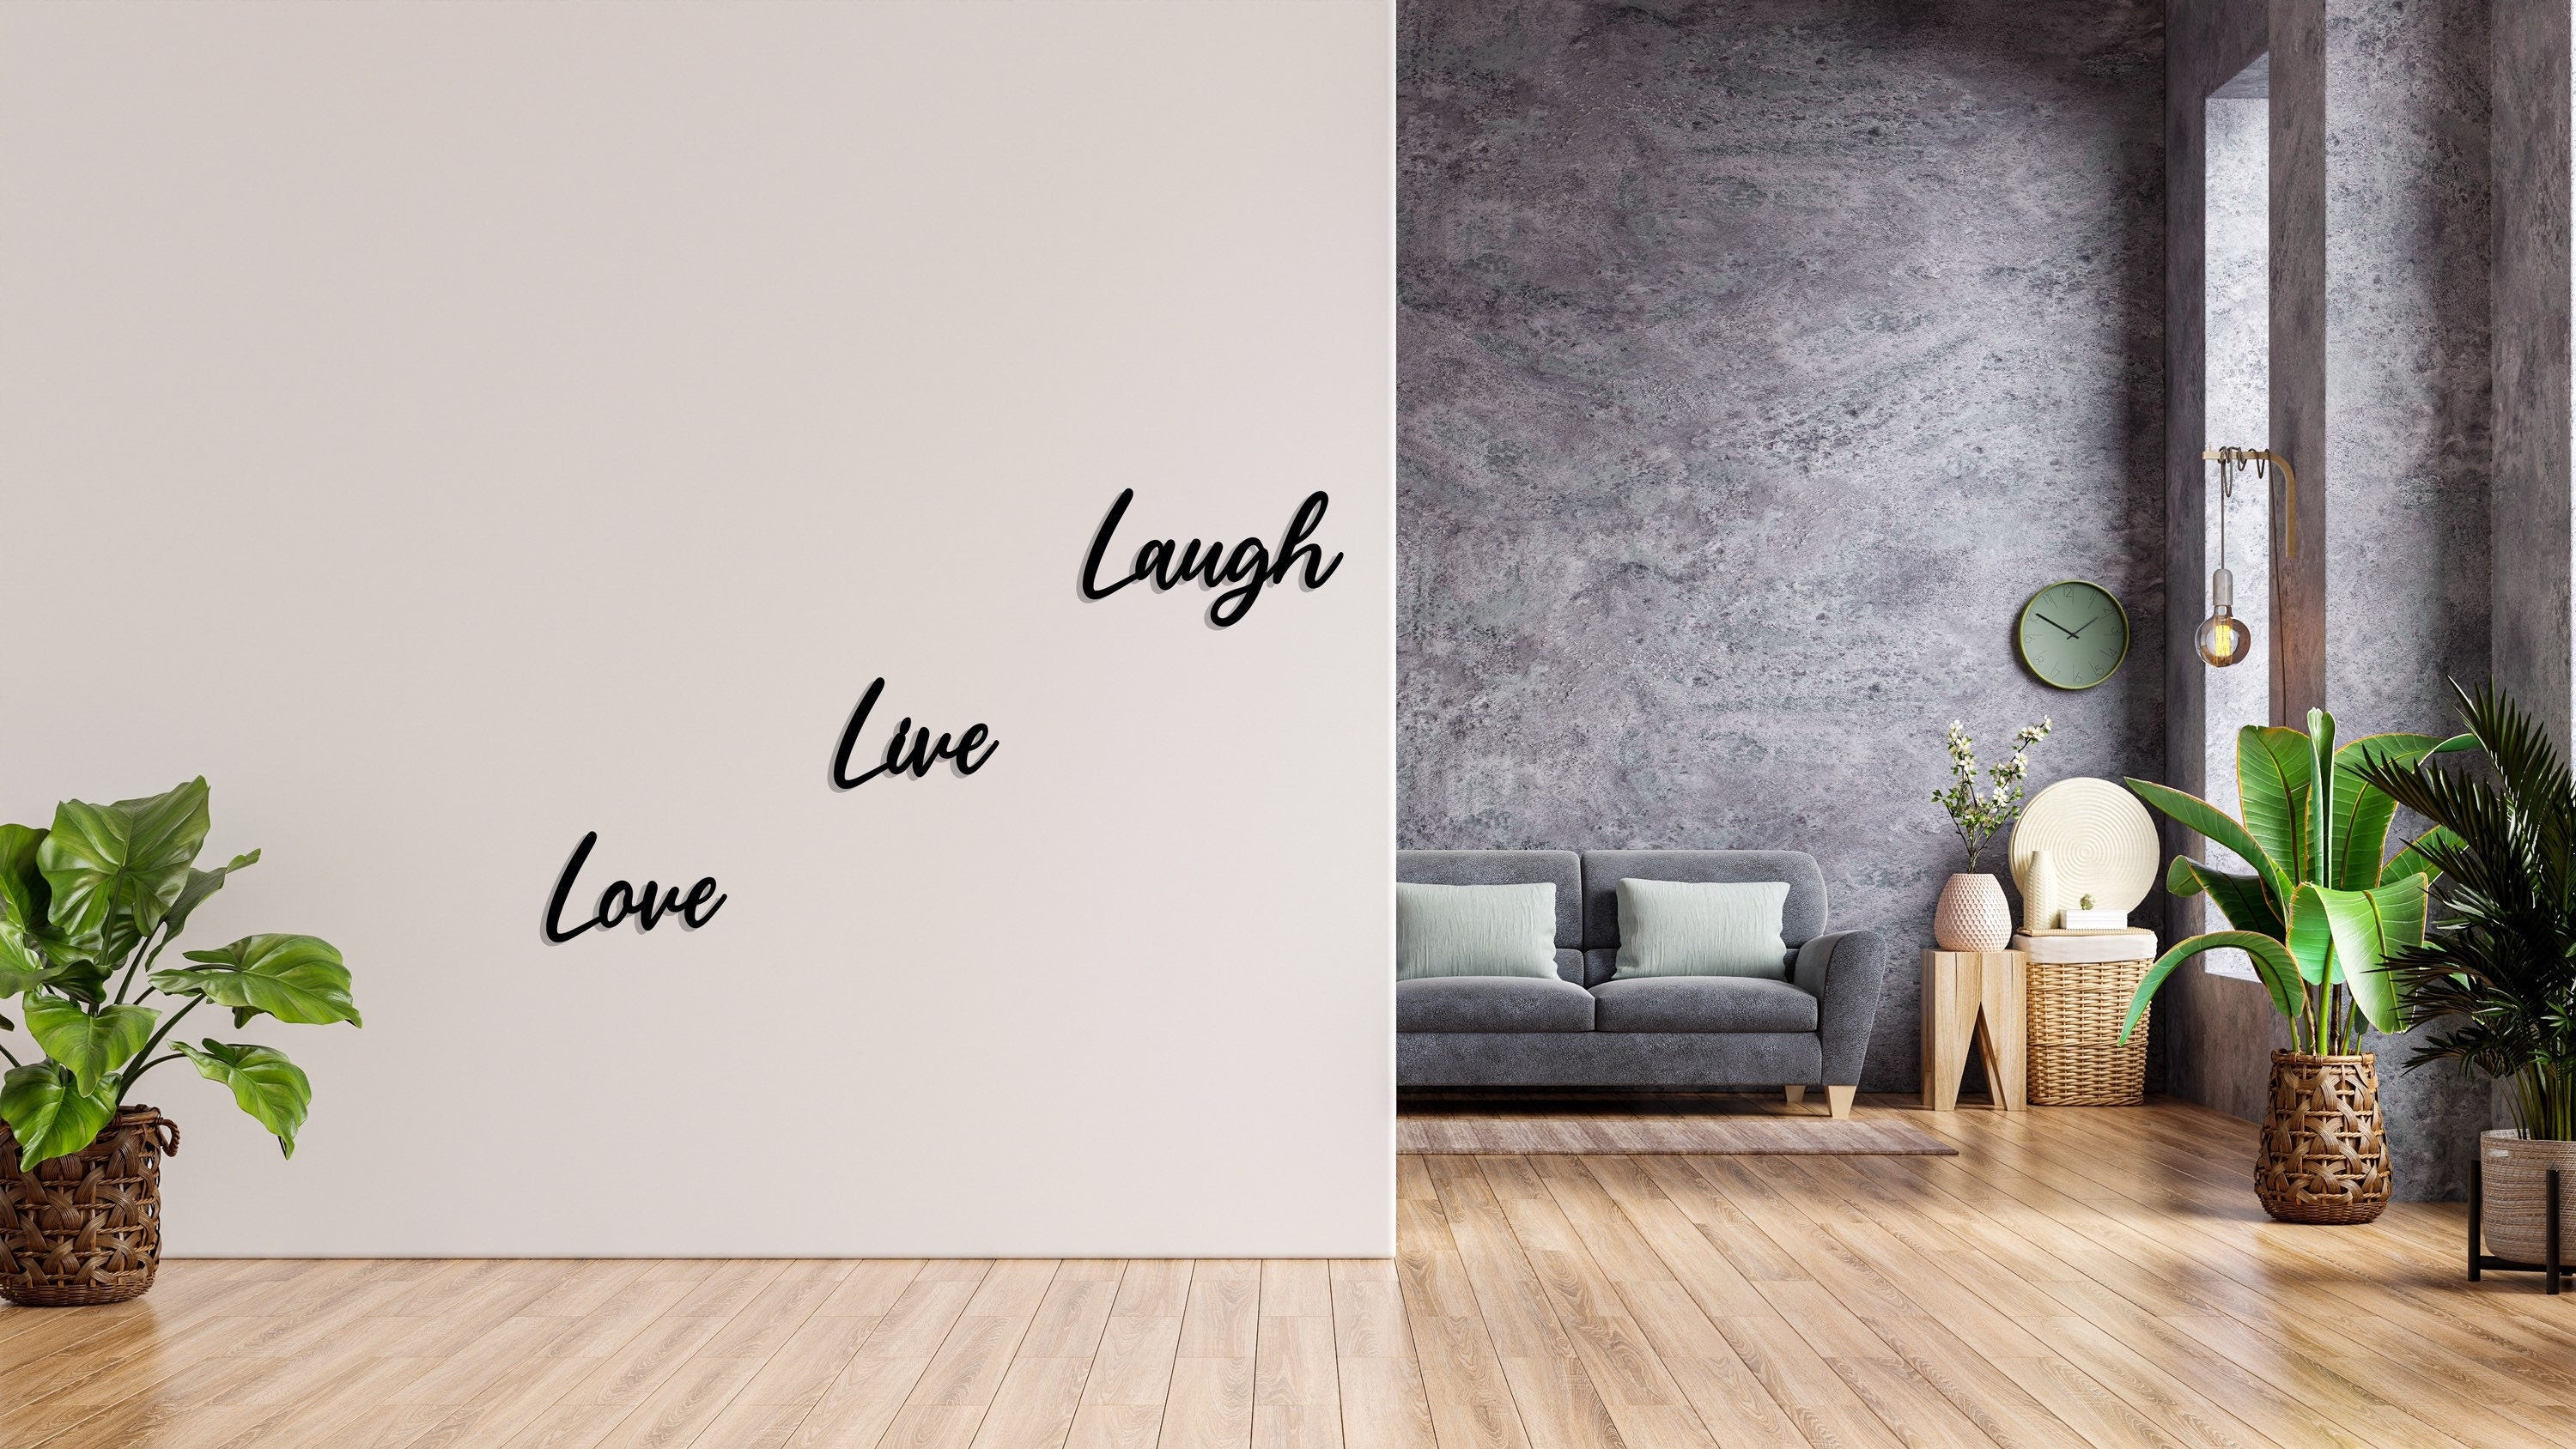 Live Love Laugh Quote Wall Art, Metal Wall Decor, Inspirational Wall Decor, Housewarming Gift, Metal Art, Metal Wall Sign, Home Decor, Metal Laser Cut Metal Signs Custom Gift Ideas 24x24IN